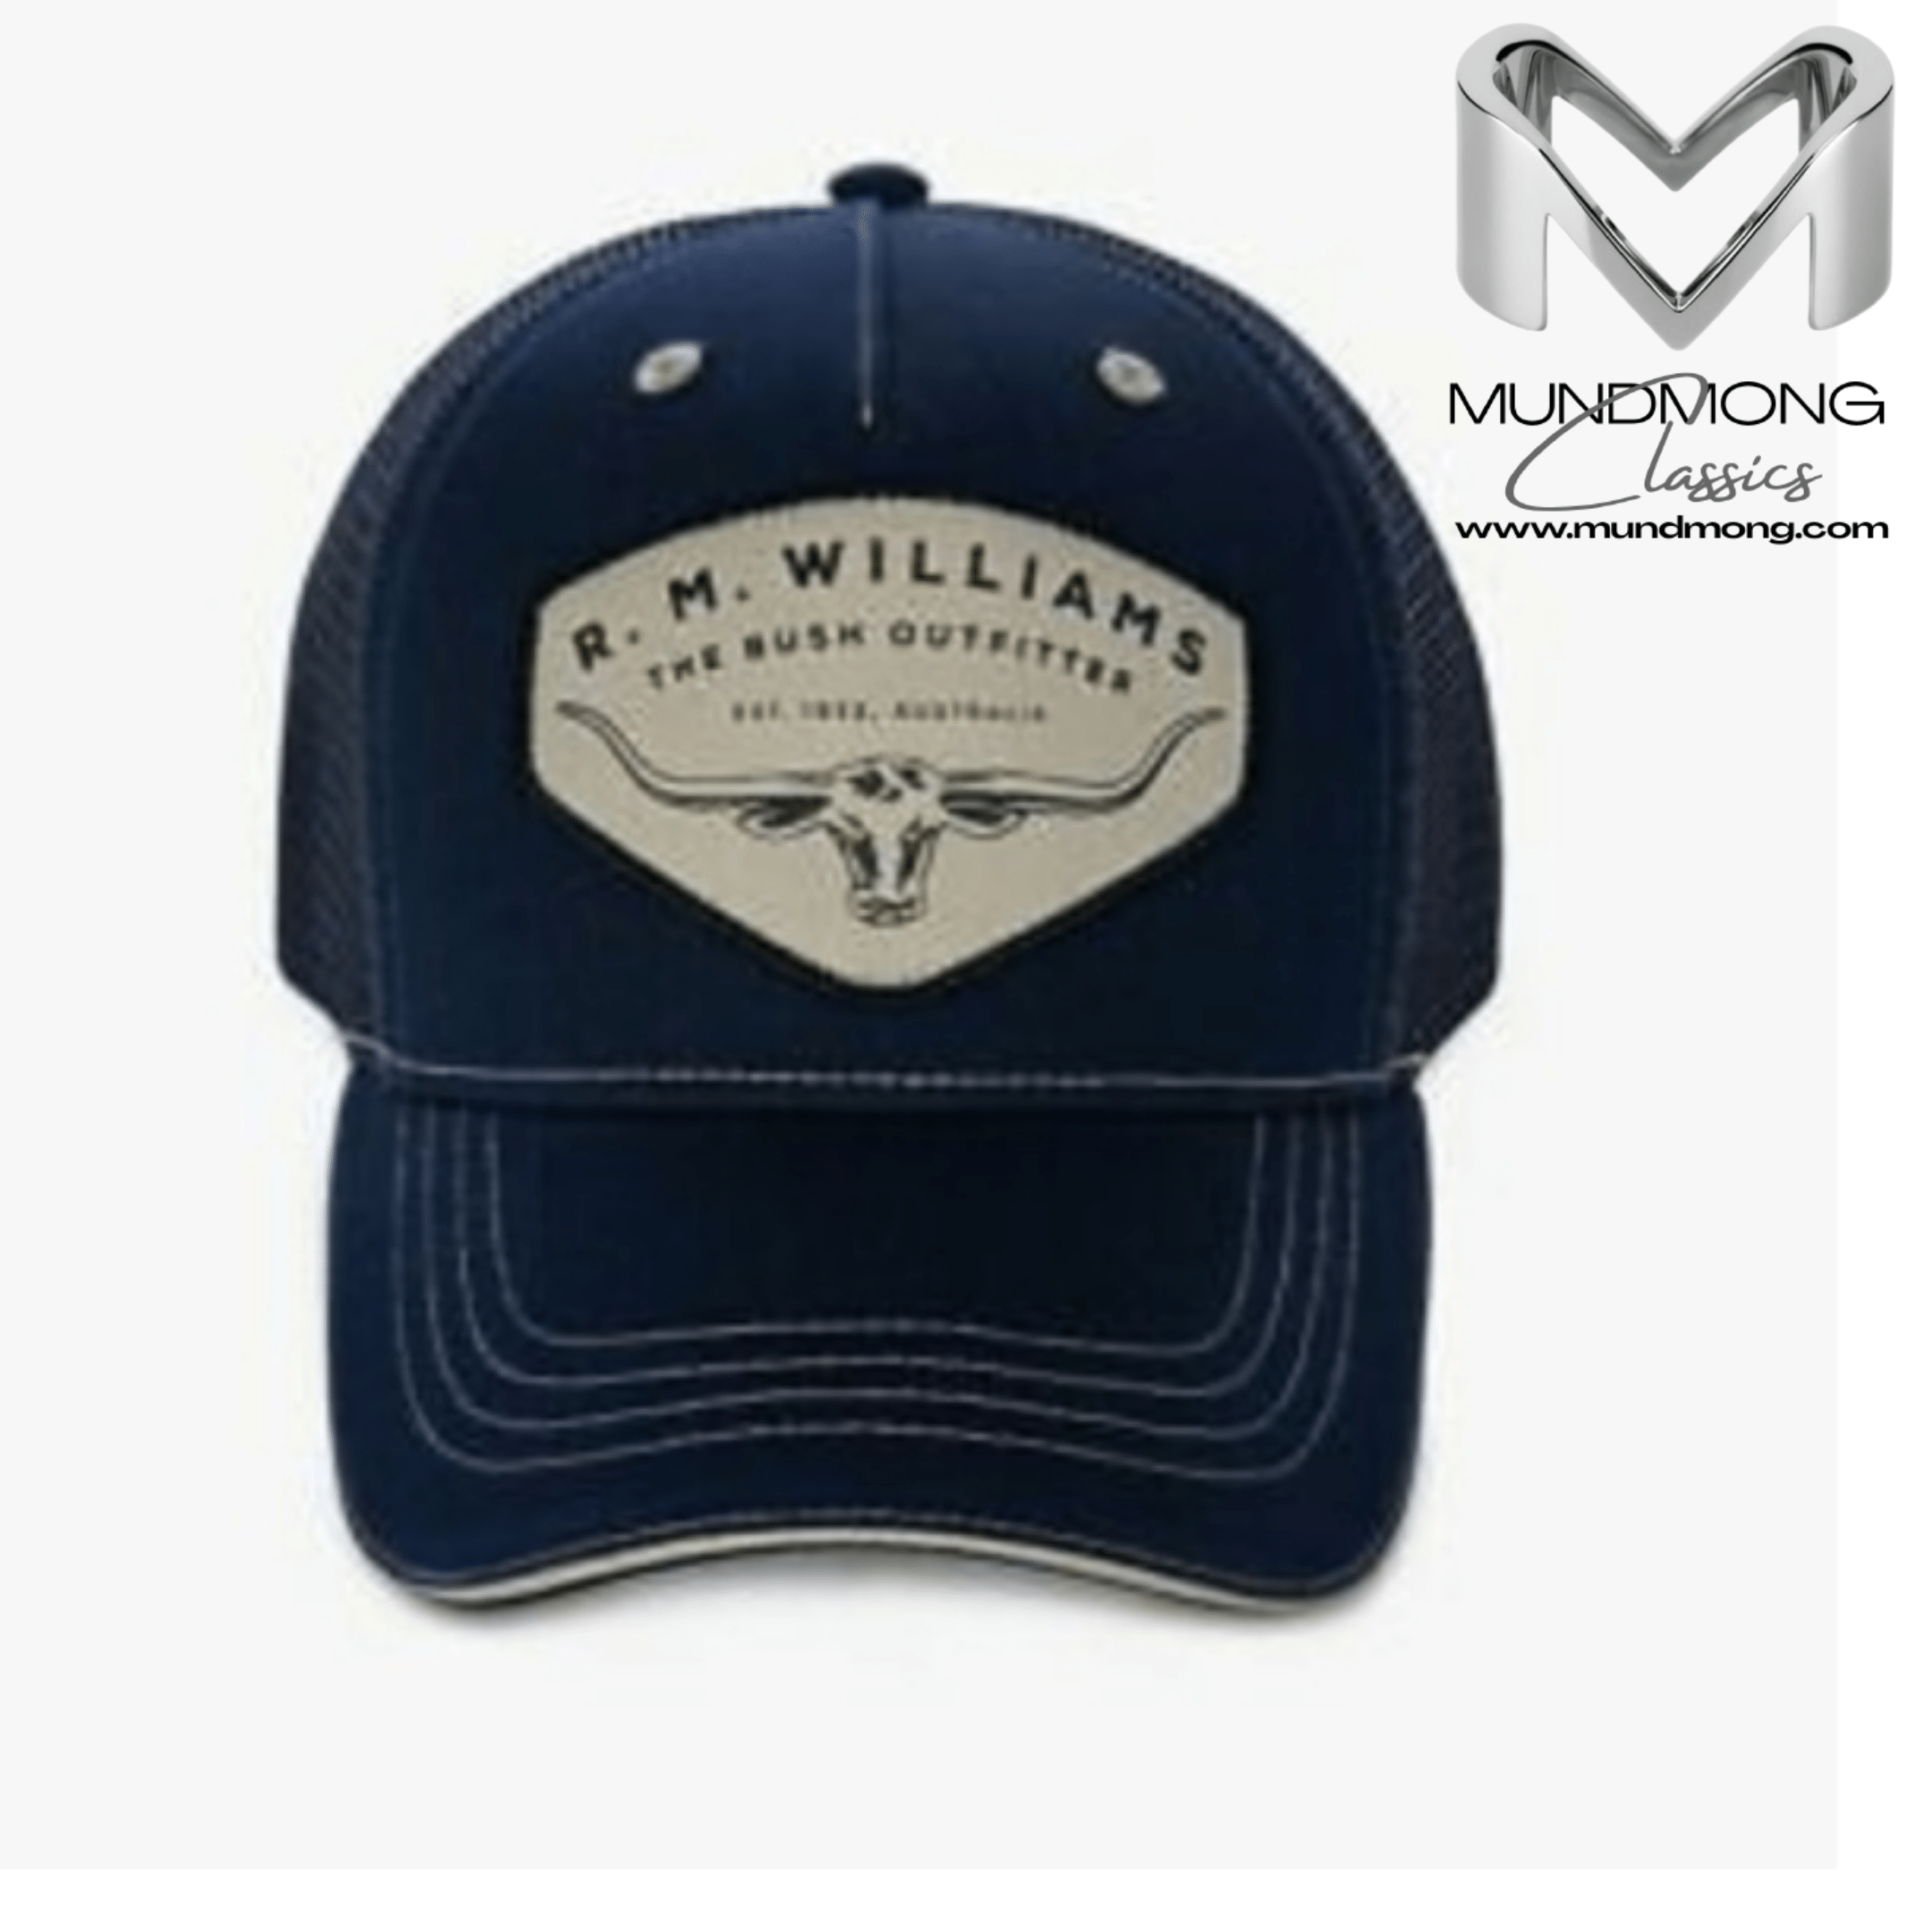 New R.M. Williams caps now in - Titleys Western Wear